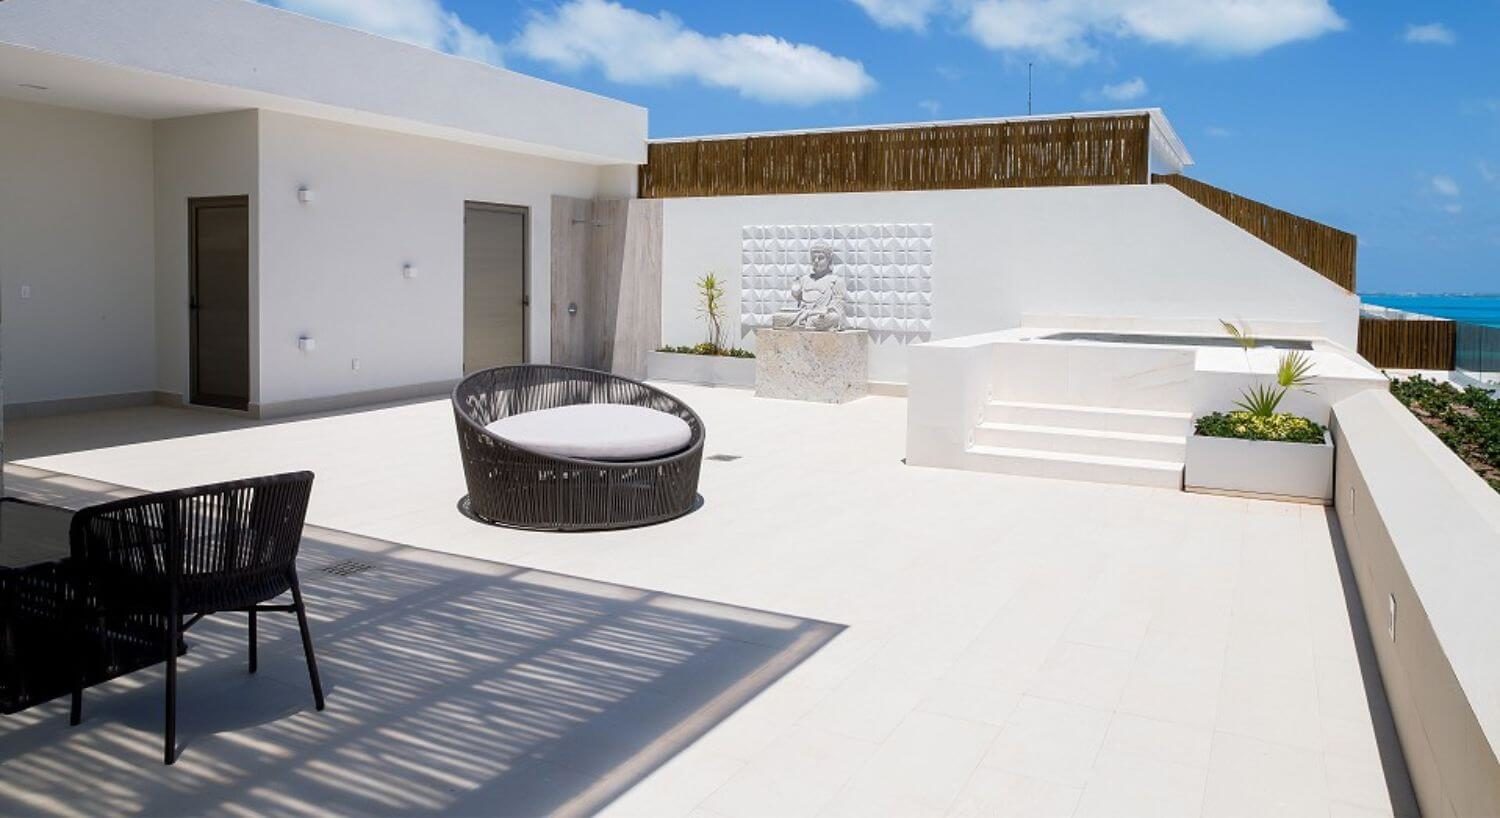 A rooftop terrace with a jacuzzi and patio furniture, along with views of the turquoise ocean.